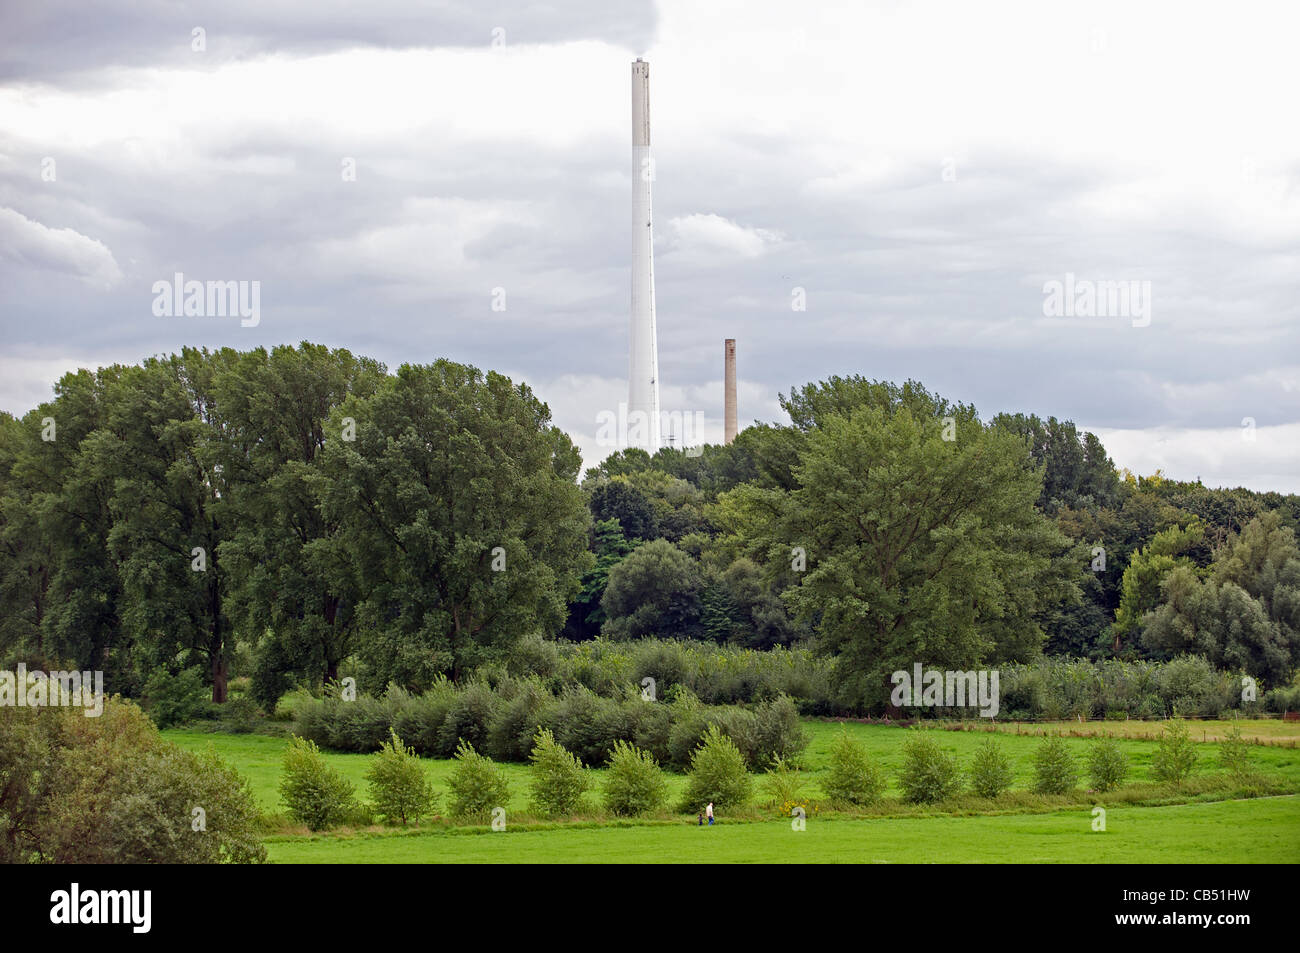 Chimneys of the Ford car factory, Cologne, Germany. Stock Photo